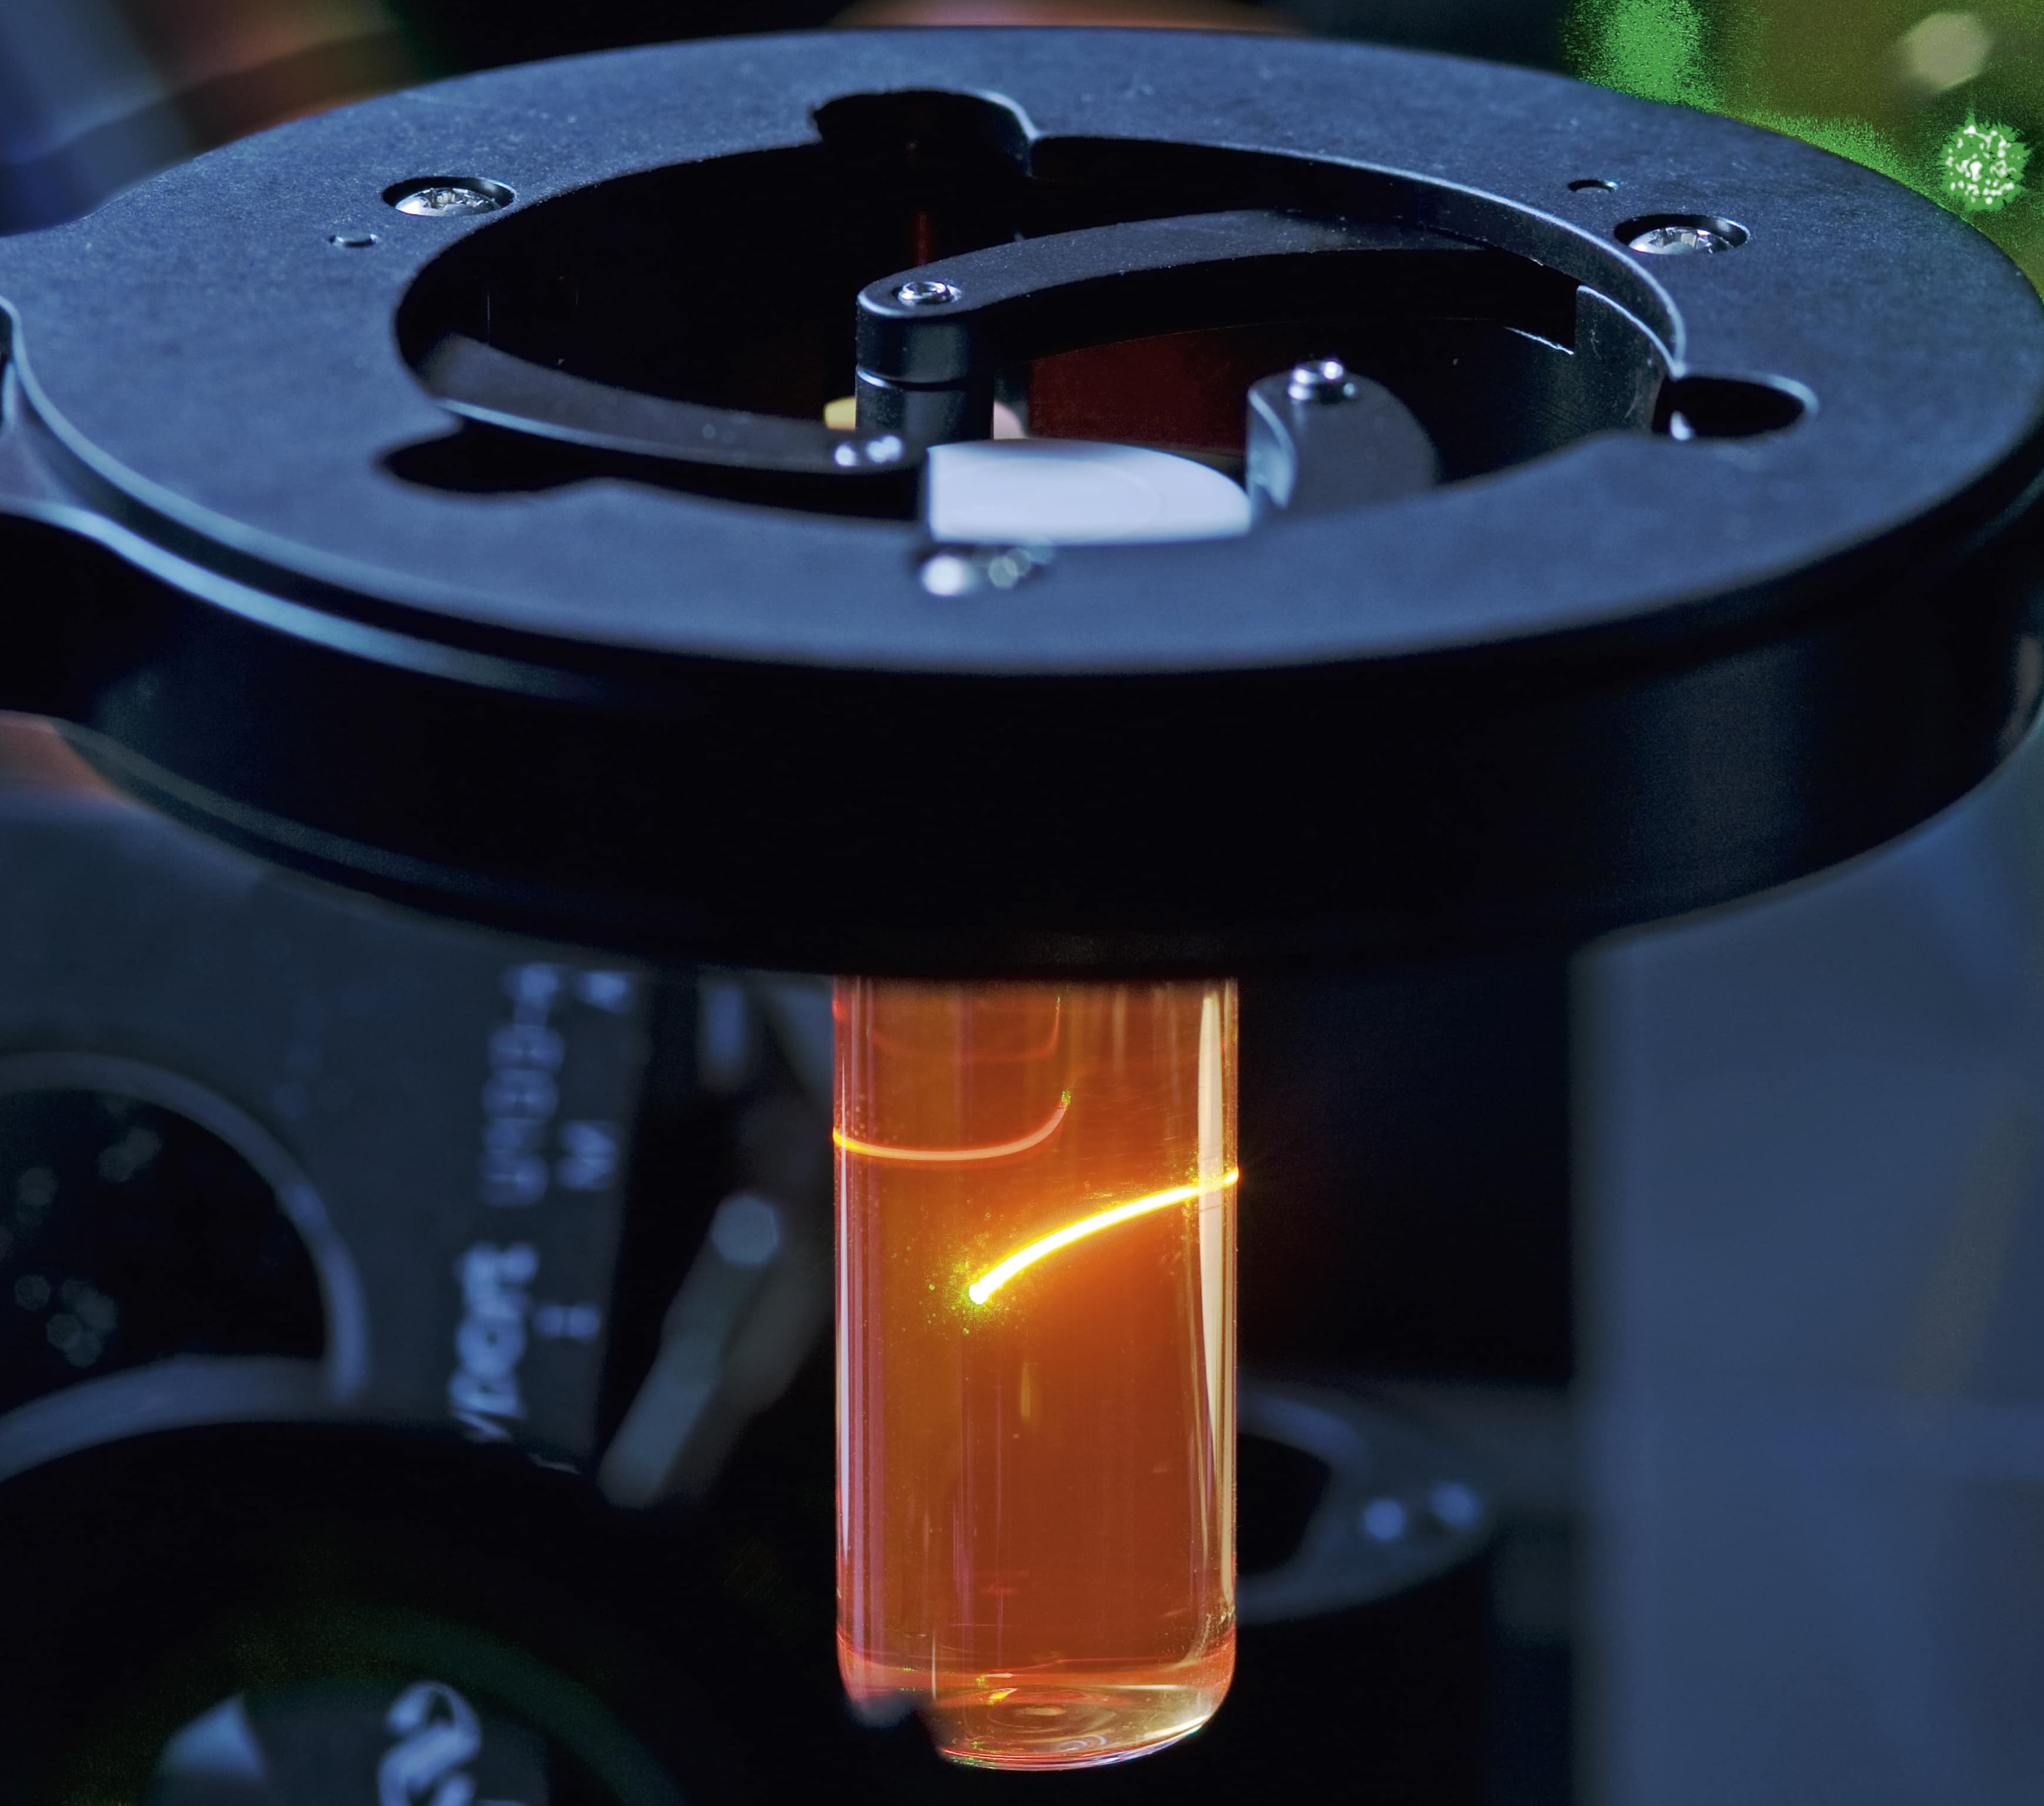 Tiny semiconductor crystals glow